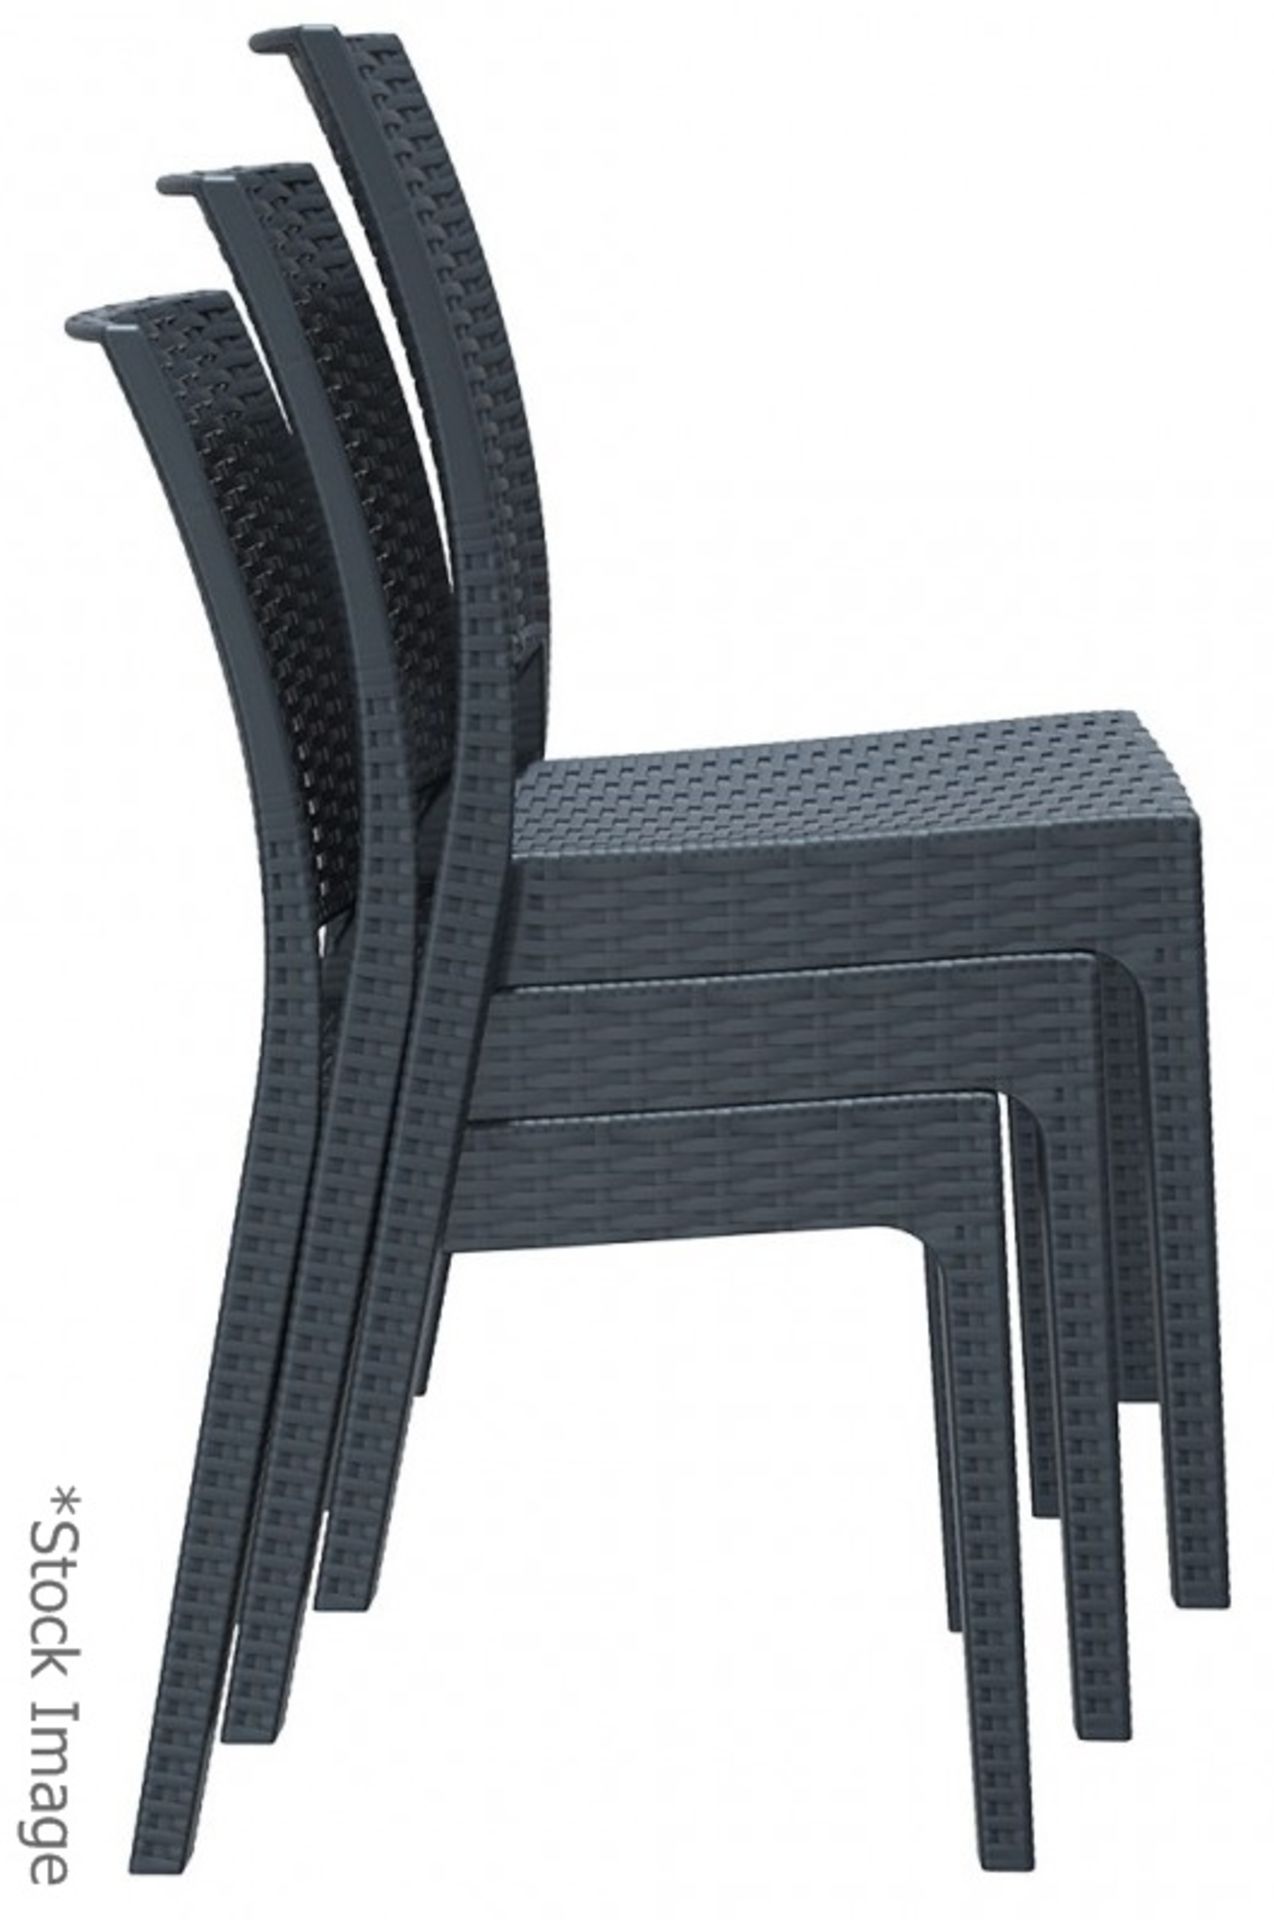 8 x Siesta 'Florida' Rattan Style Garden Chairs In Dark Grey - Suitable For Commercial or Home Use - - Image 8 of 14